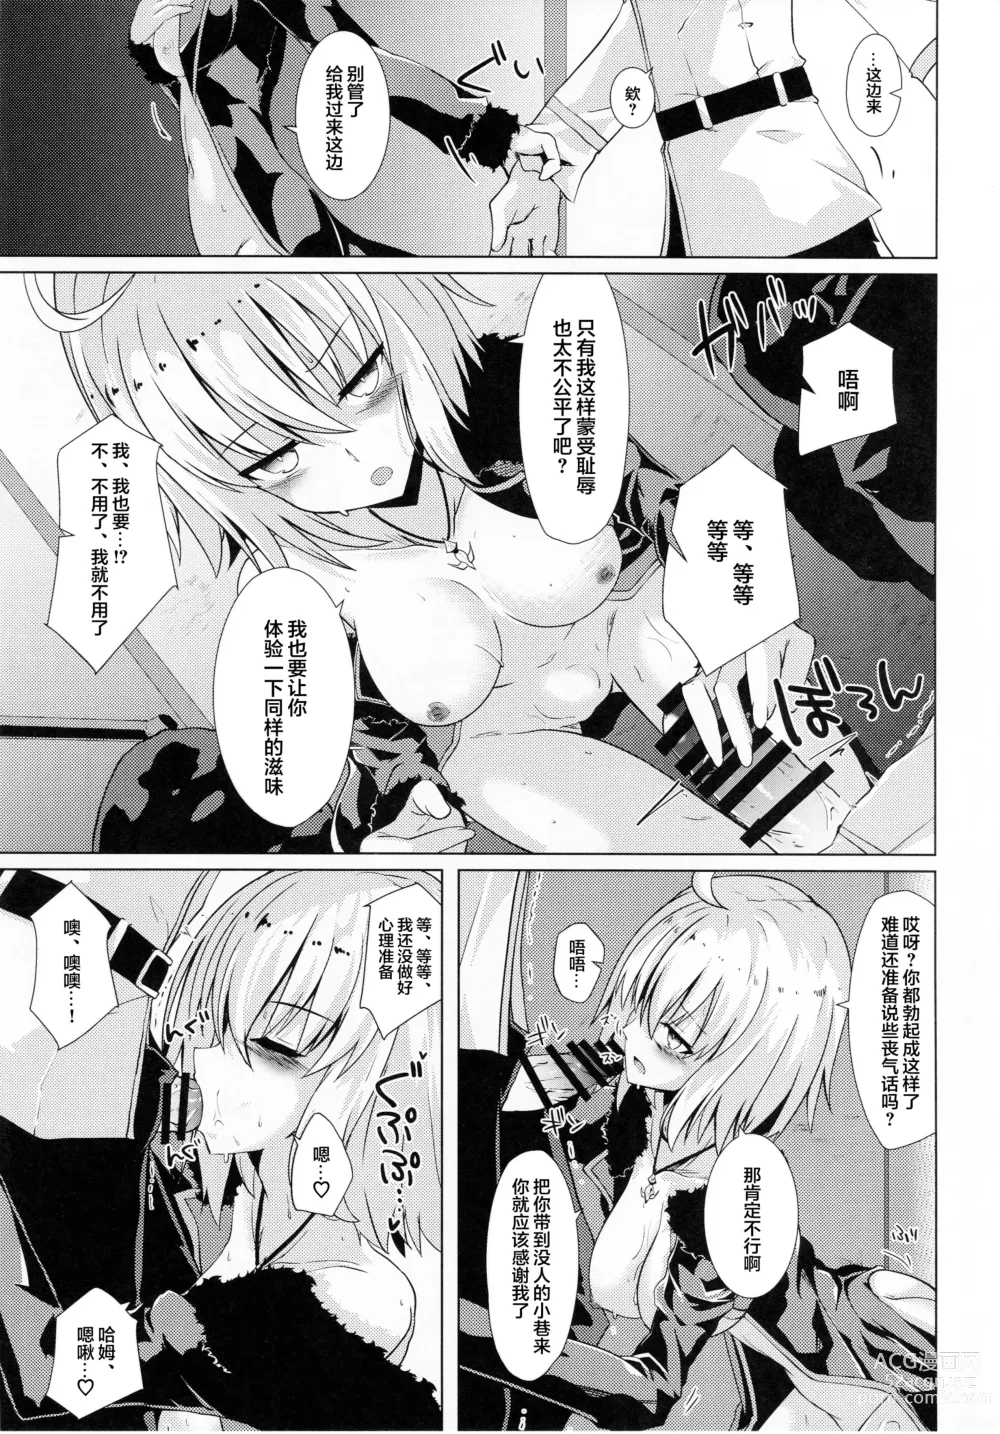 Page 8 of doujinshi Alter酱和爱之灵药和自我束缚卷轴